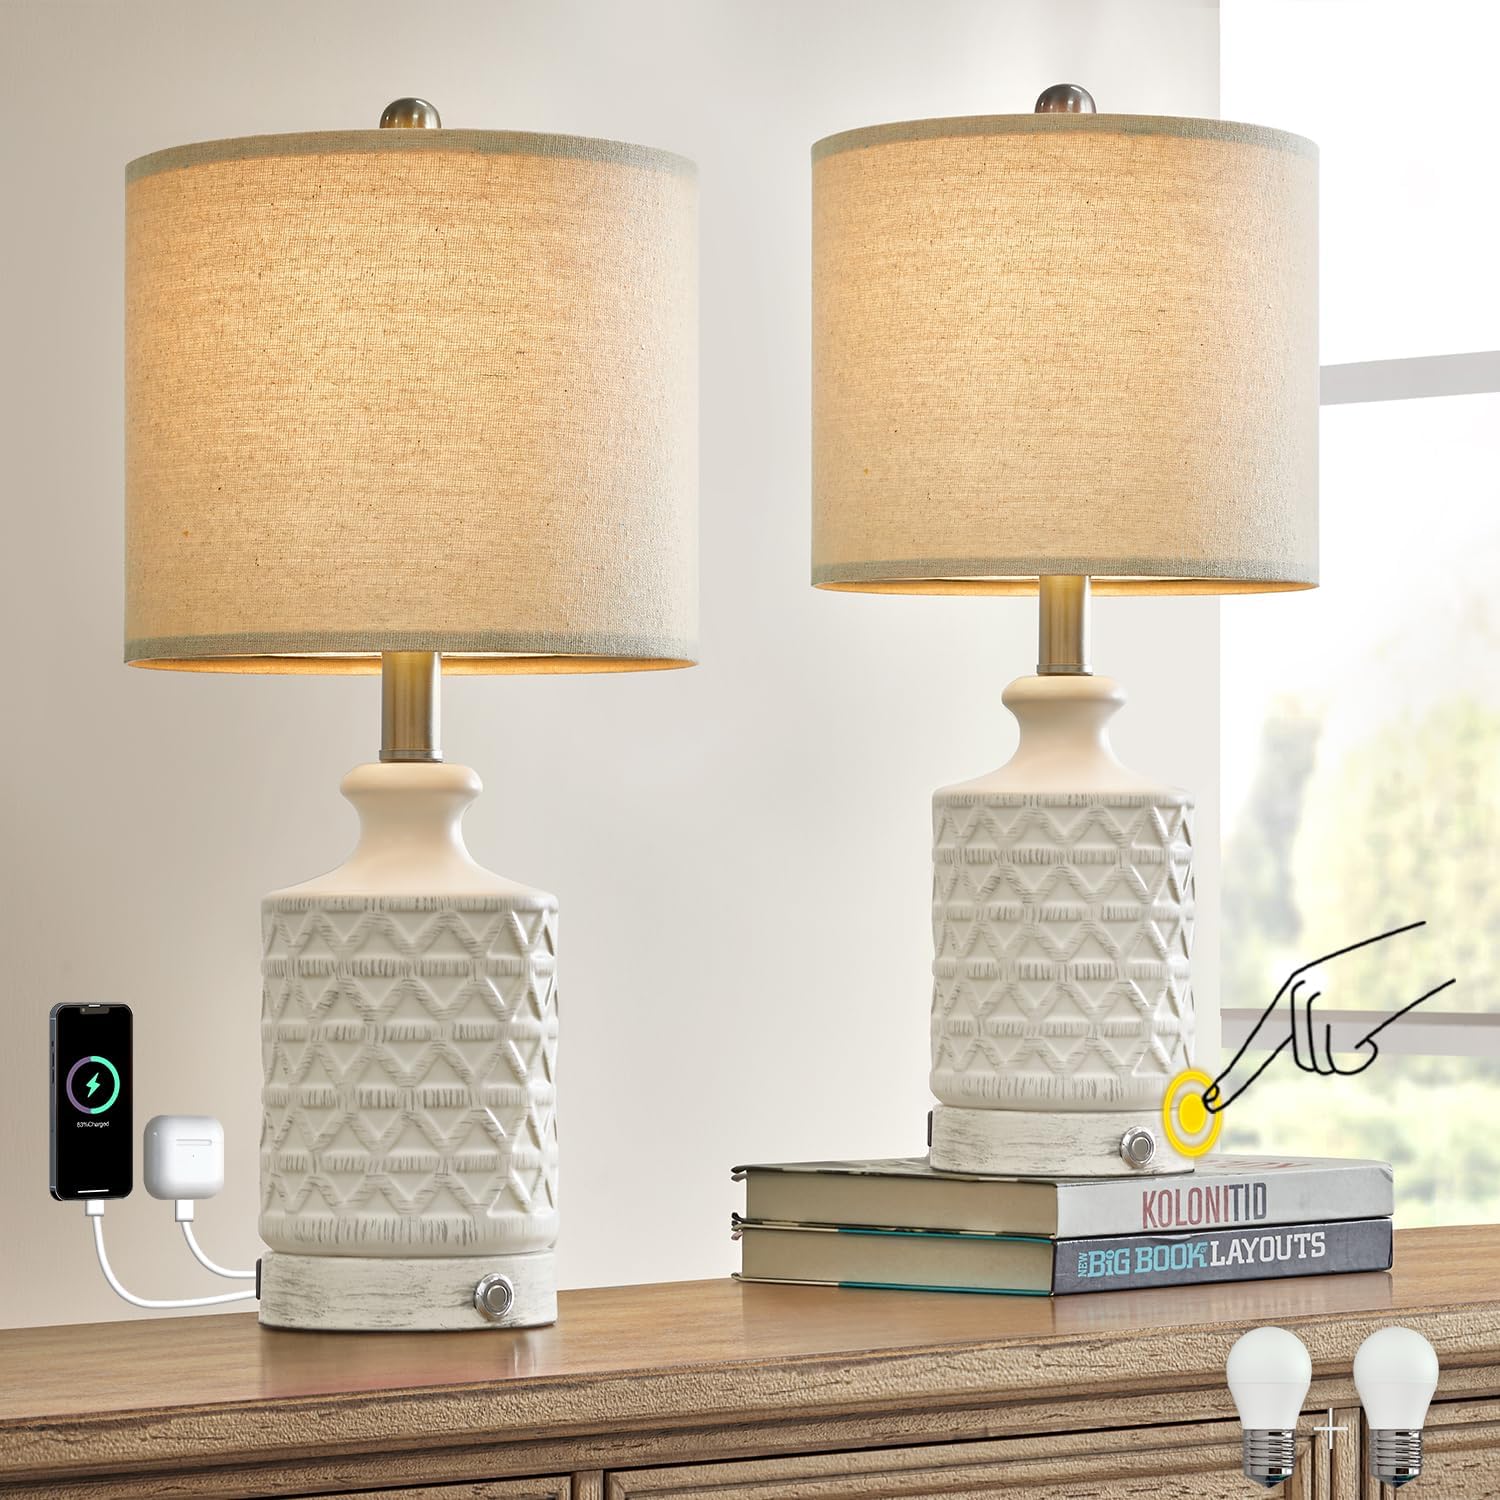 These lamps are the perfect style and size for bed side tables. My one base came damaged (the dimmer button didnt work) but the seller was quick to respond and send out a new one. ( Thanks Lucy!) they have a few different brightness levels and the usb port is clutch